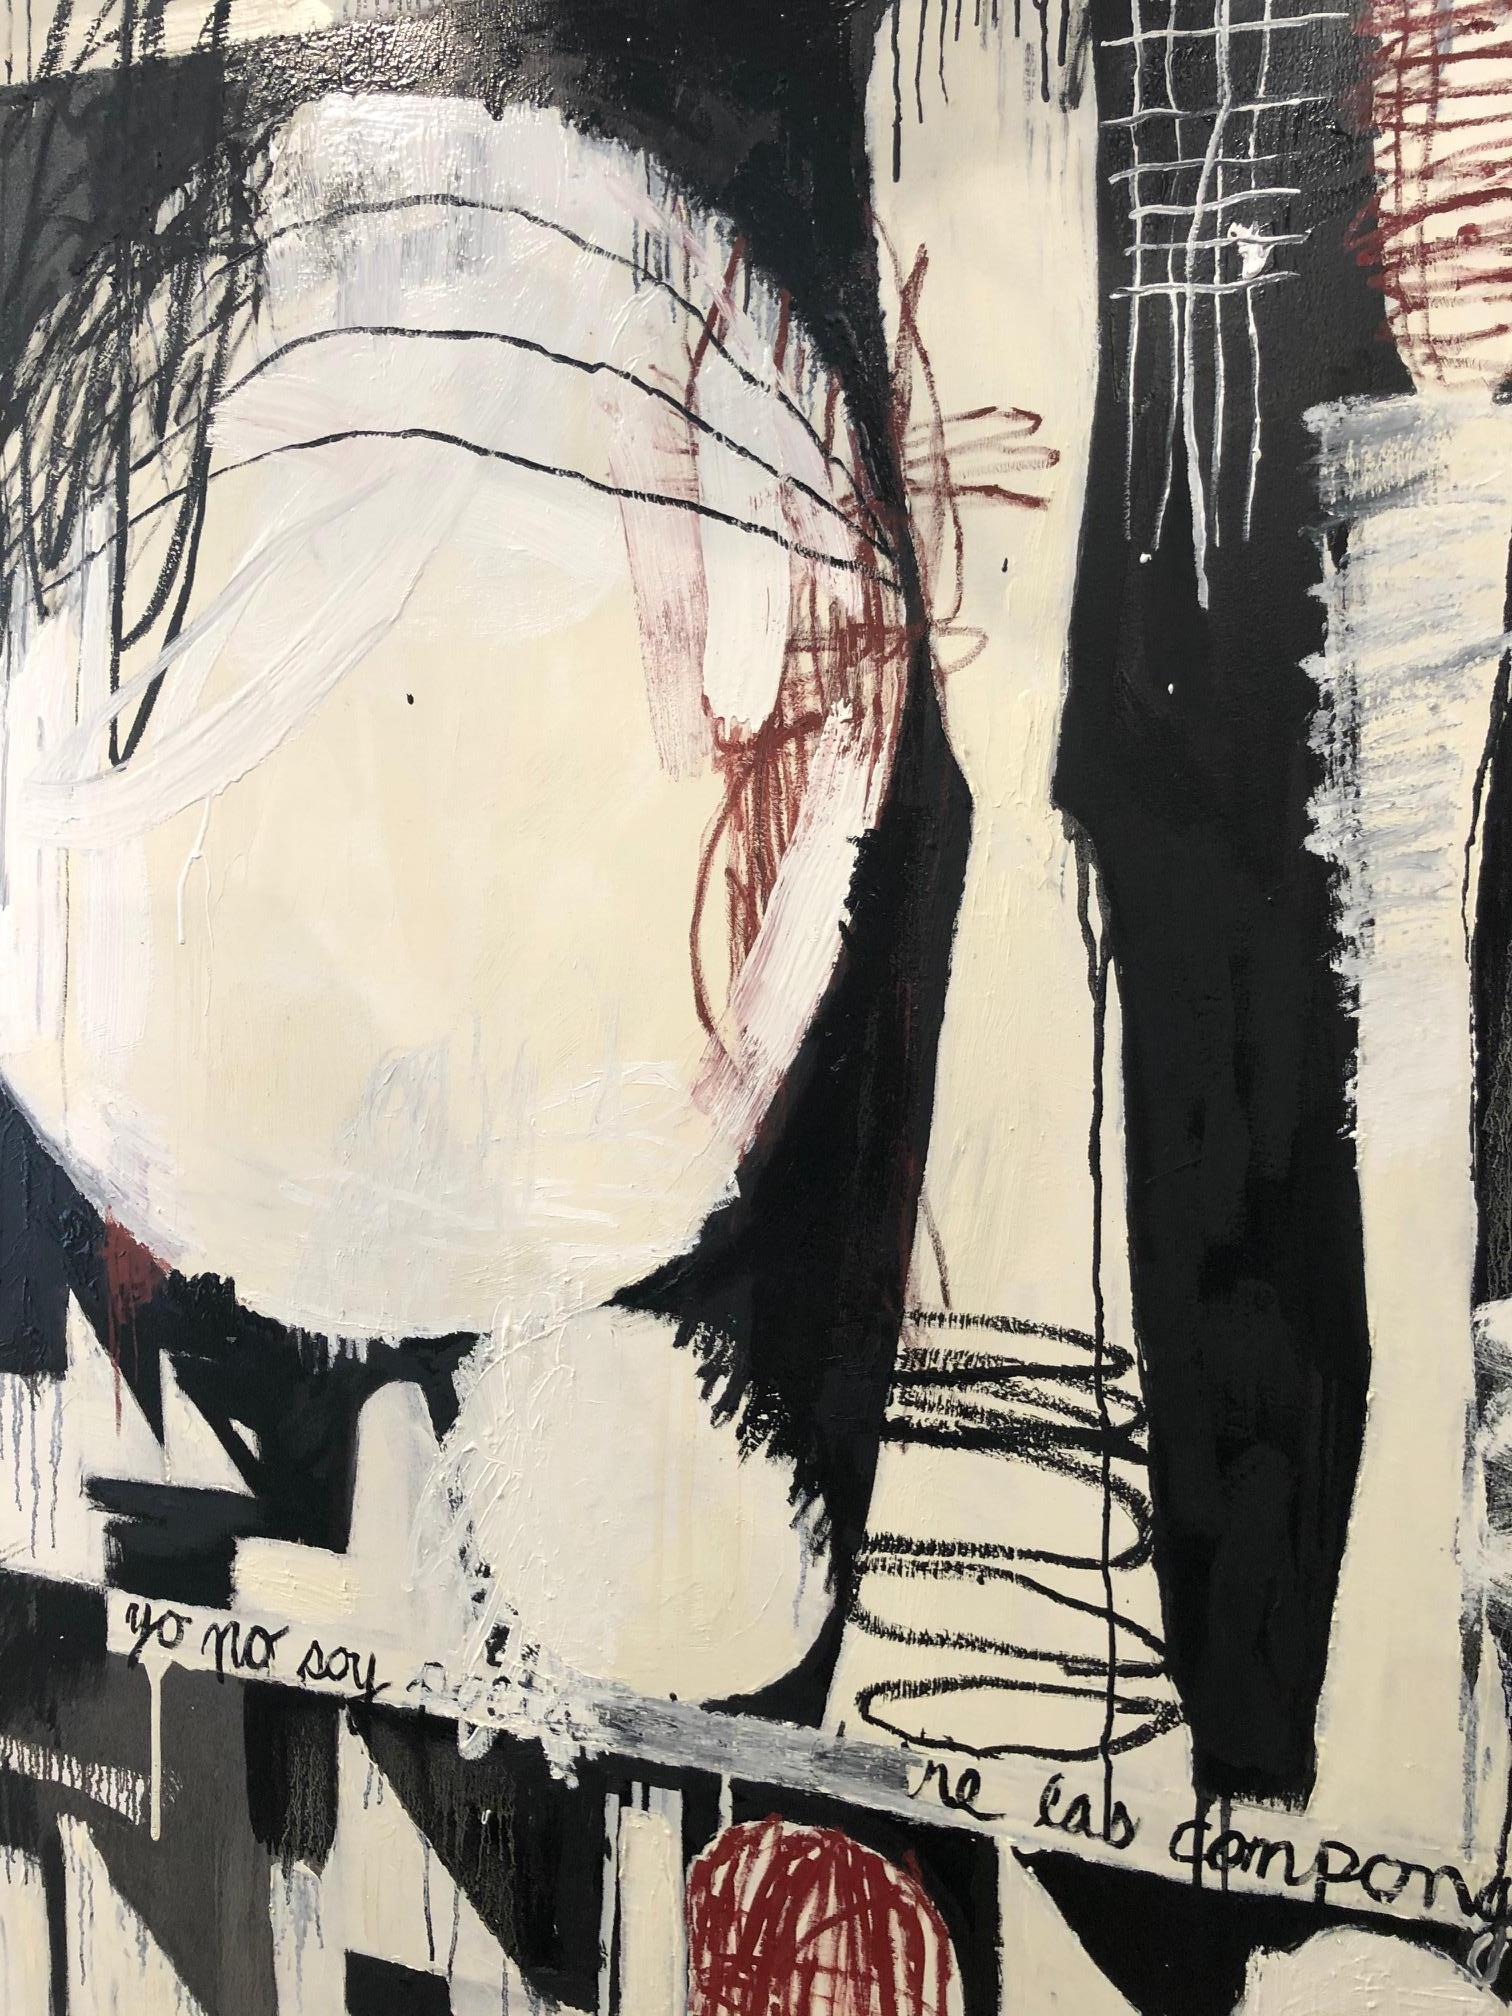 Action painting in mainly black and white with cream, brown and ivory, 'Tu Que Eres Poeta,' by Mexican-American contemporary visual artist and celebrated architect Javier Arizmendi-Kalb, who creates autobiographical paintings that are comprised of